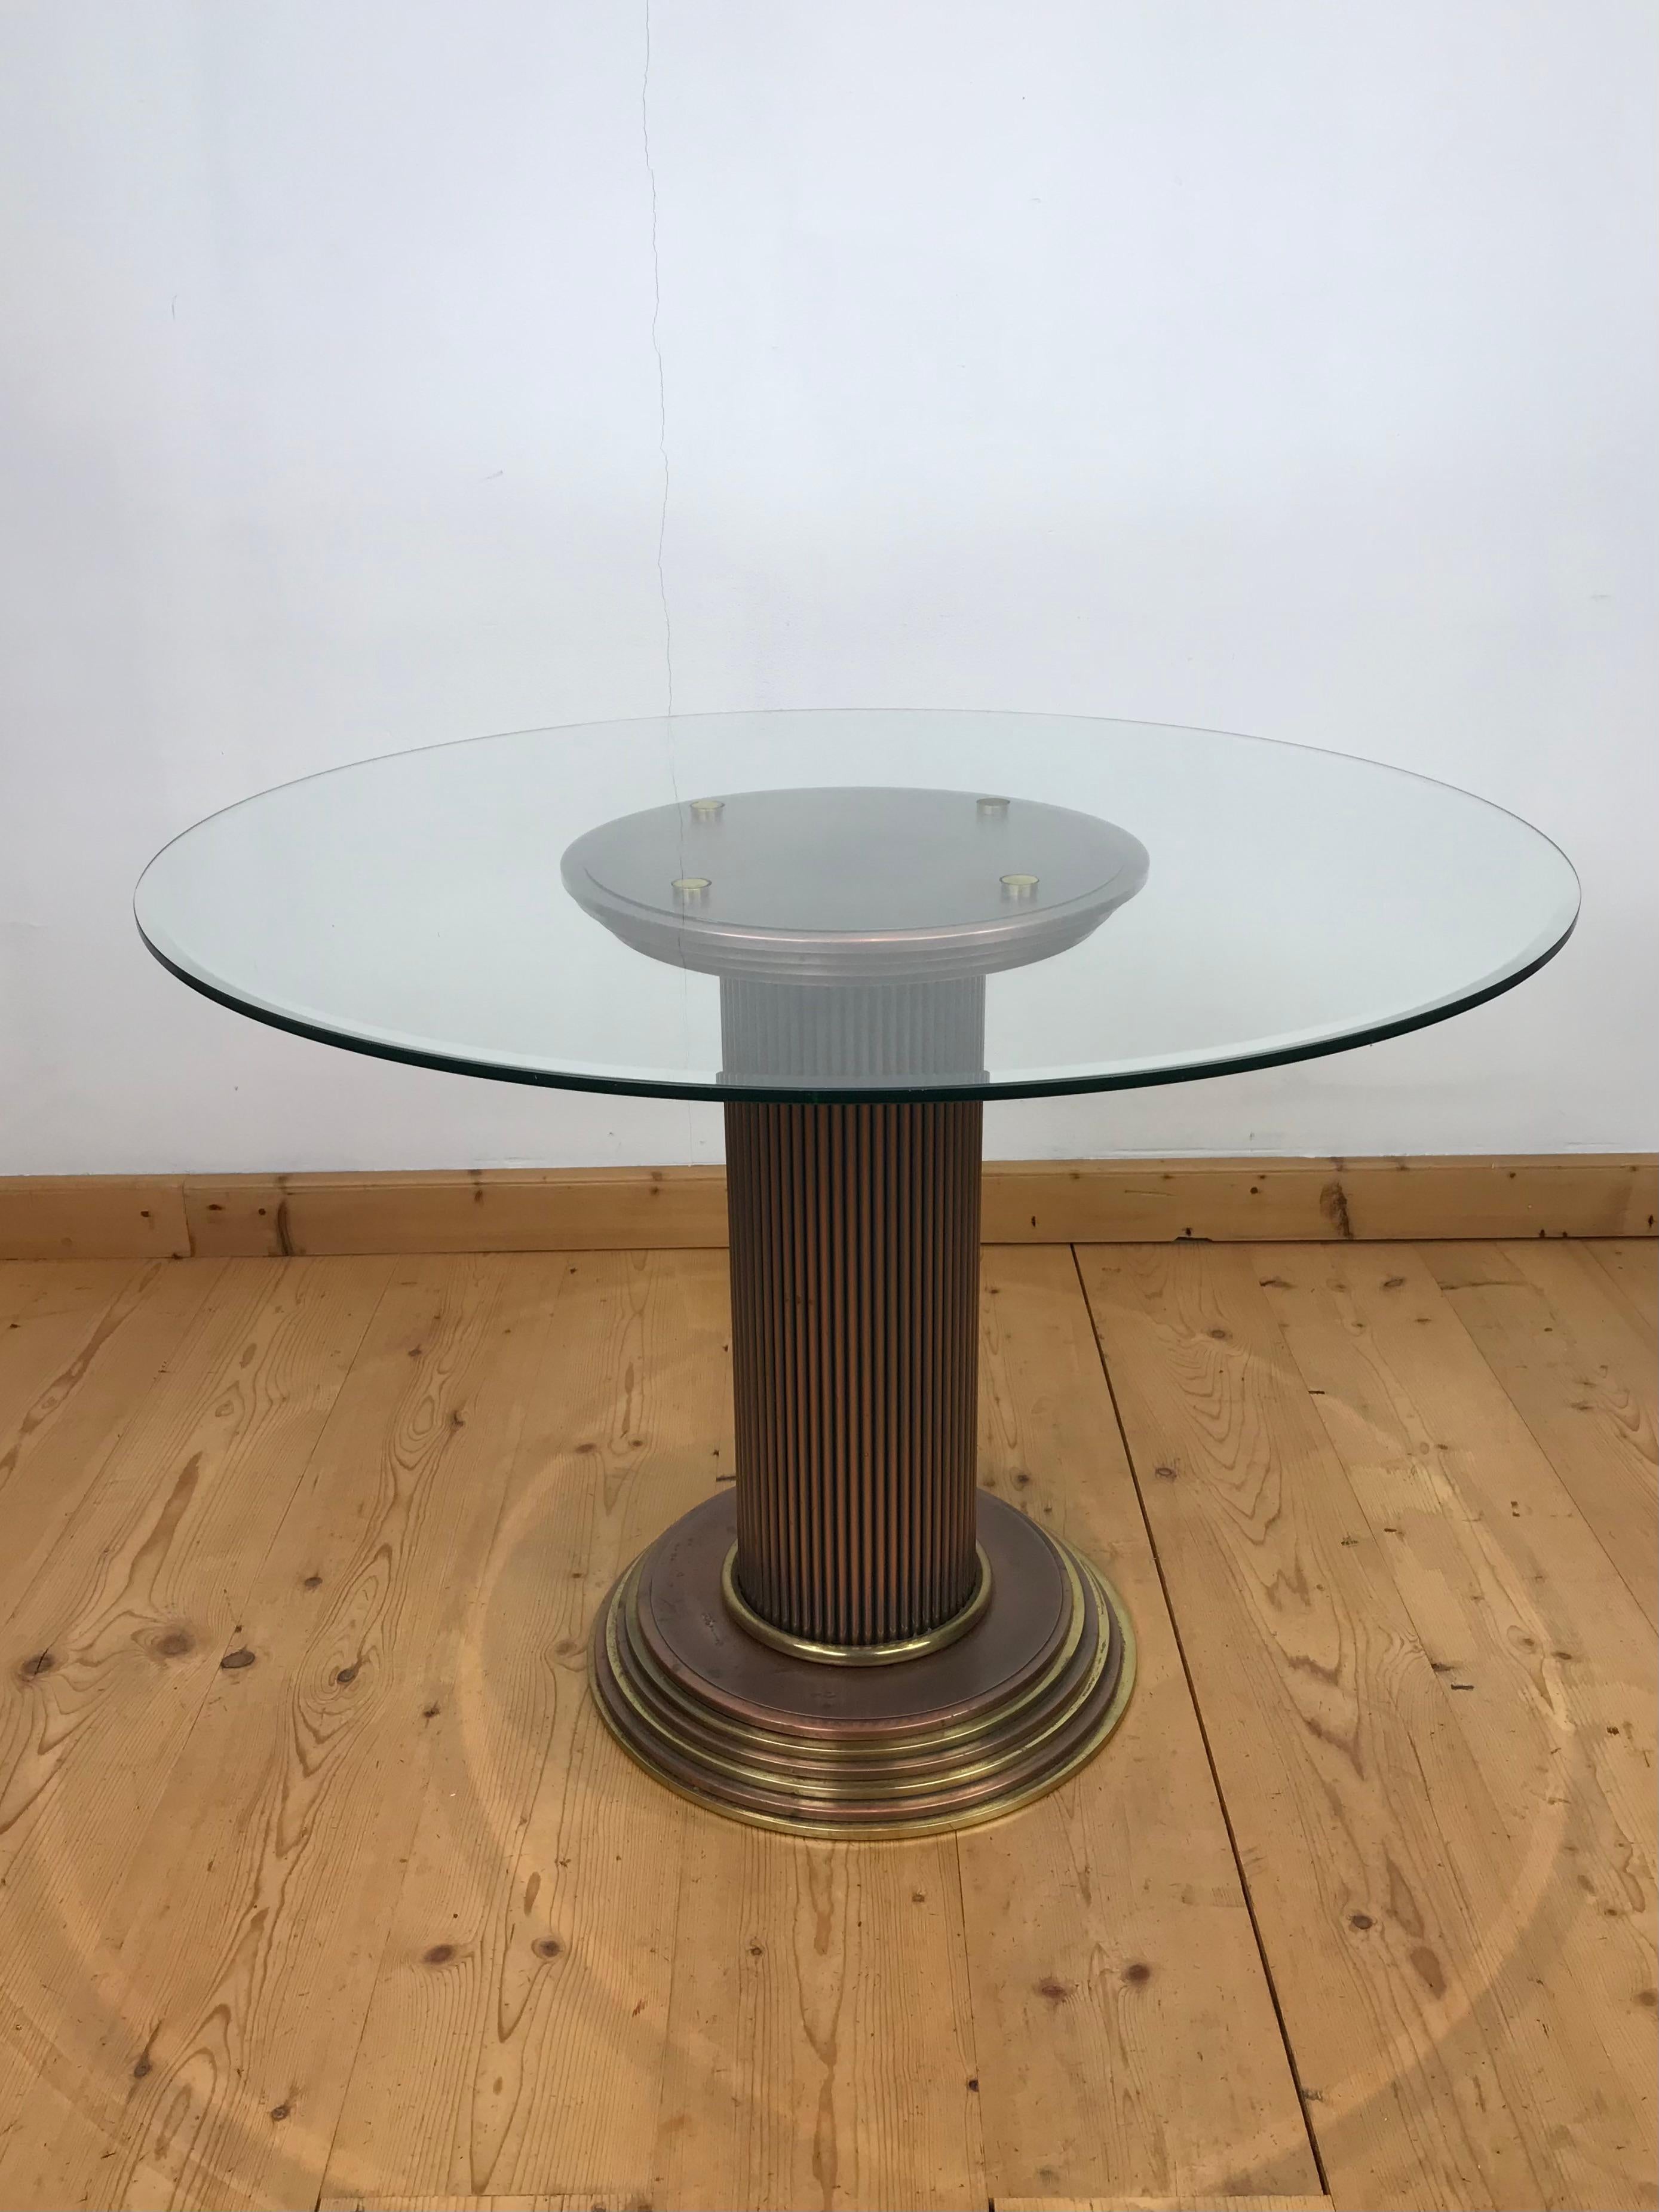 Beveled Belgo Chrome Table with 2 Chairs with Roses, 1980s For Sale